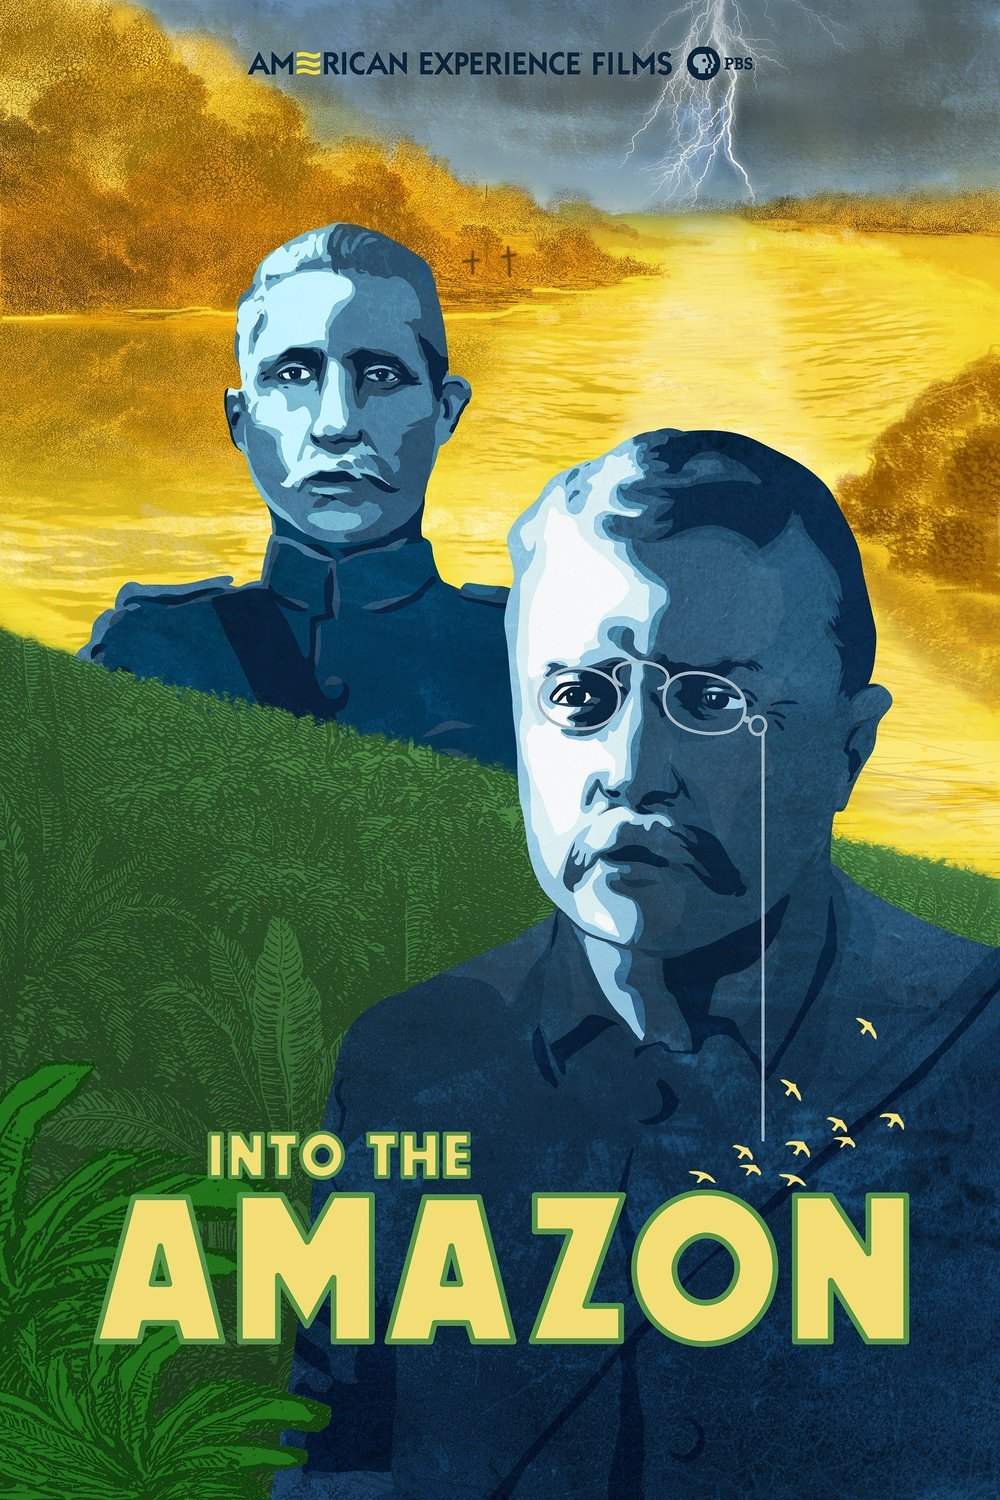 Poster of the movie American Experience: Into the Amazon